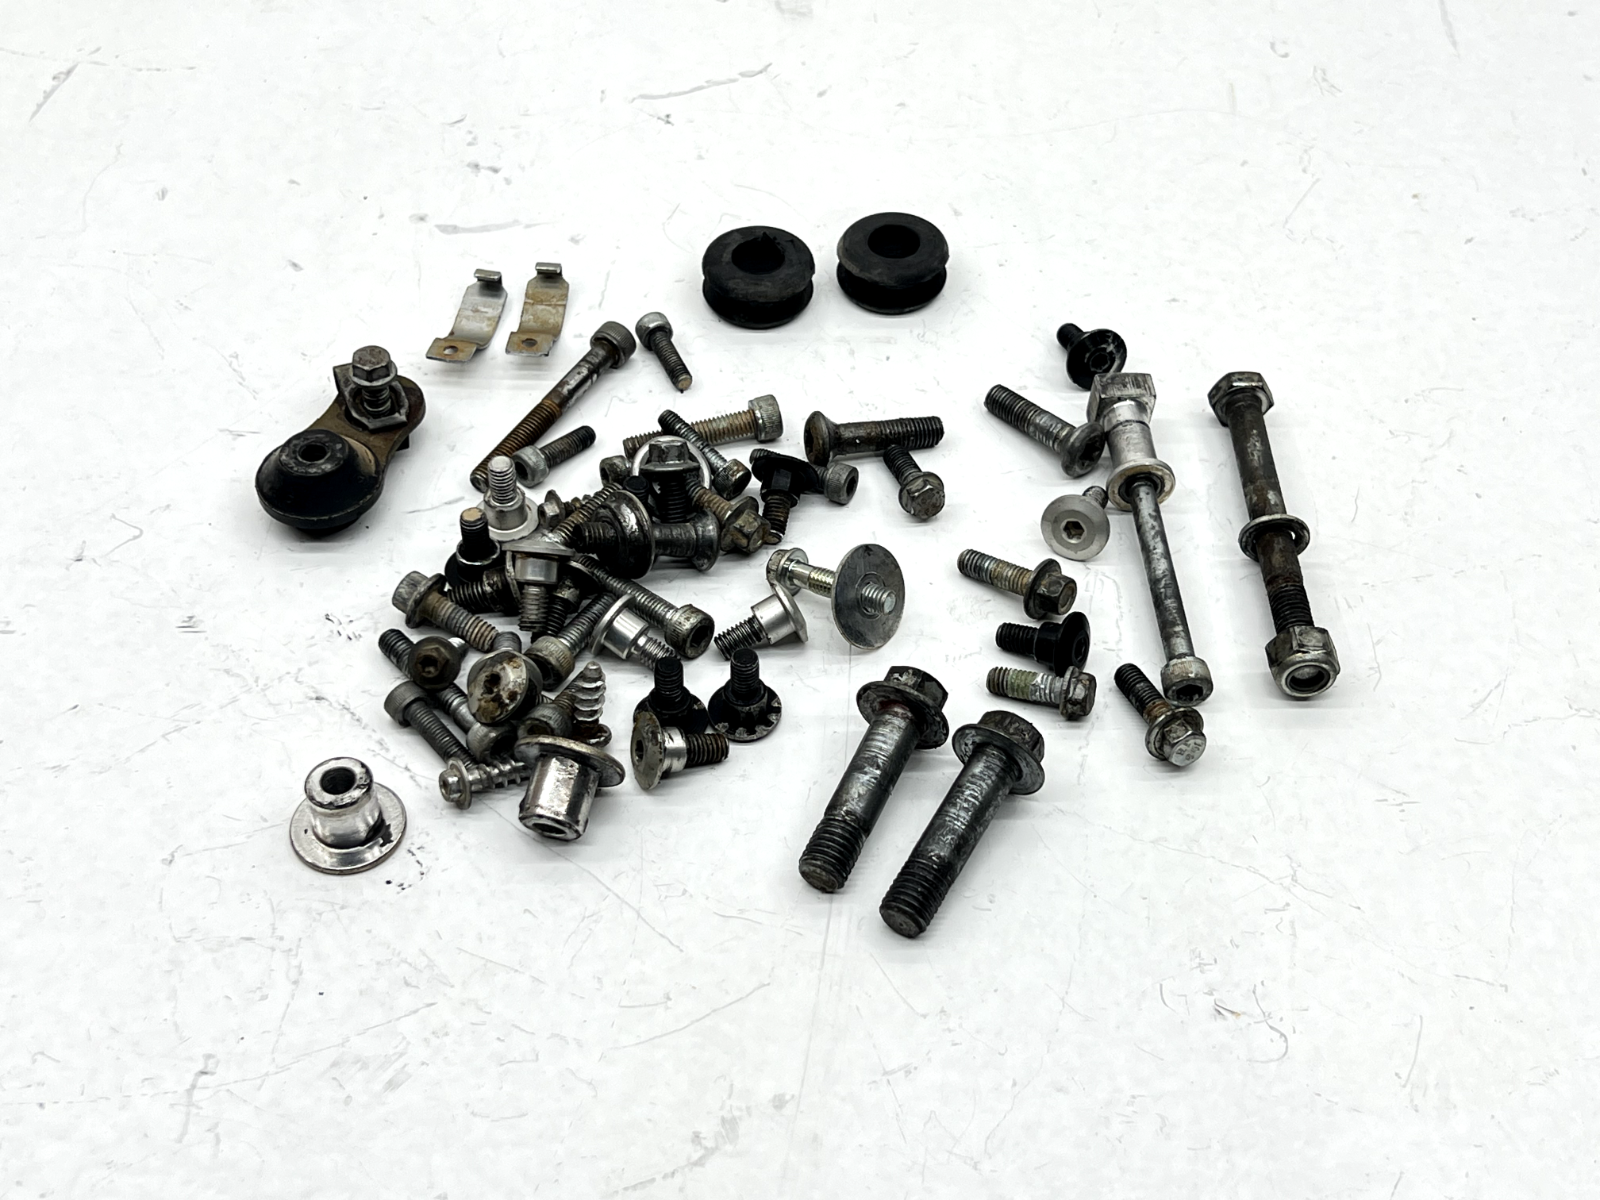 2021 Cobra CX50 FWE King Miscellaneous Hardware OEM Bolts Nuts Washers Clips